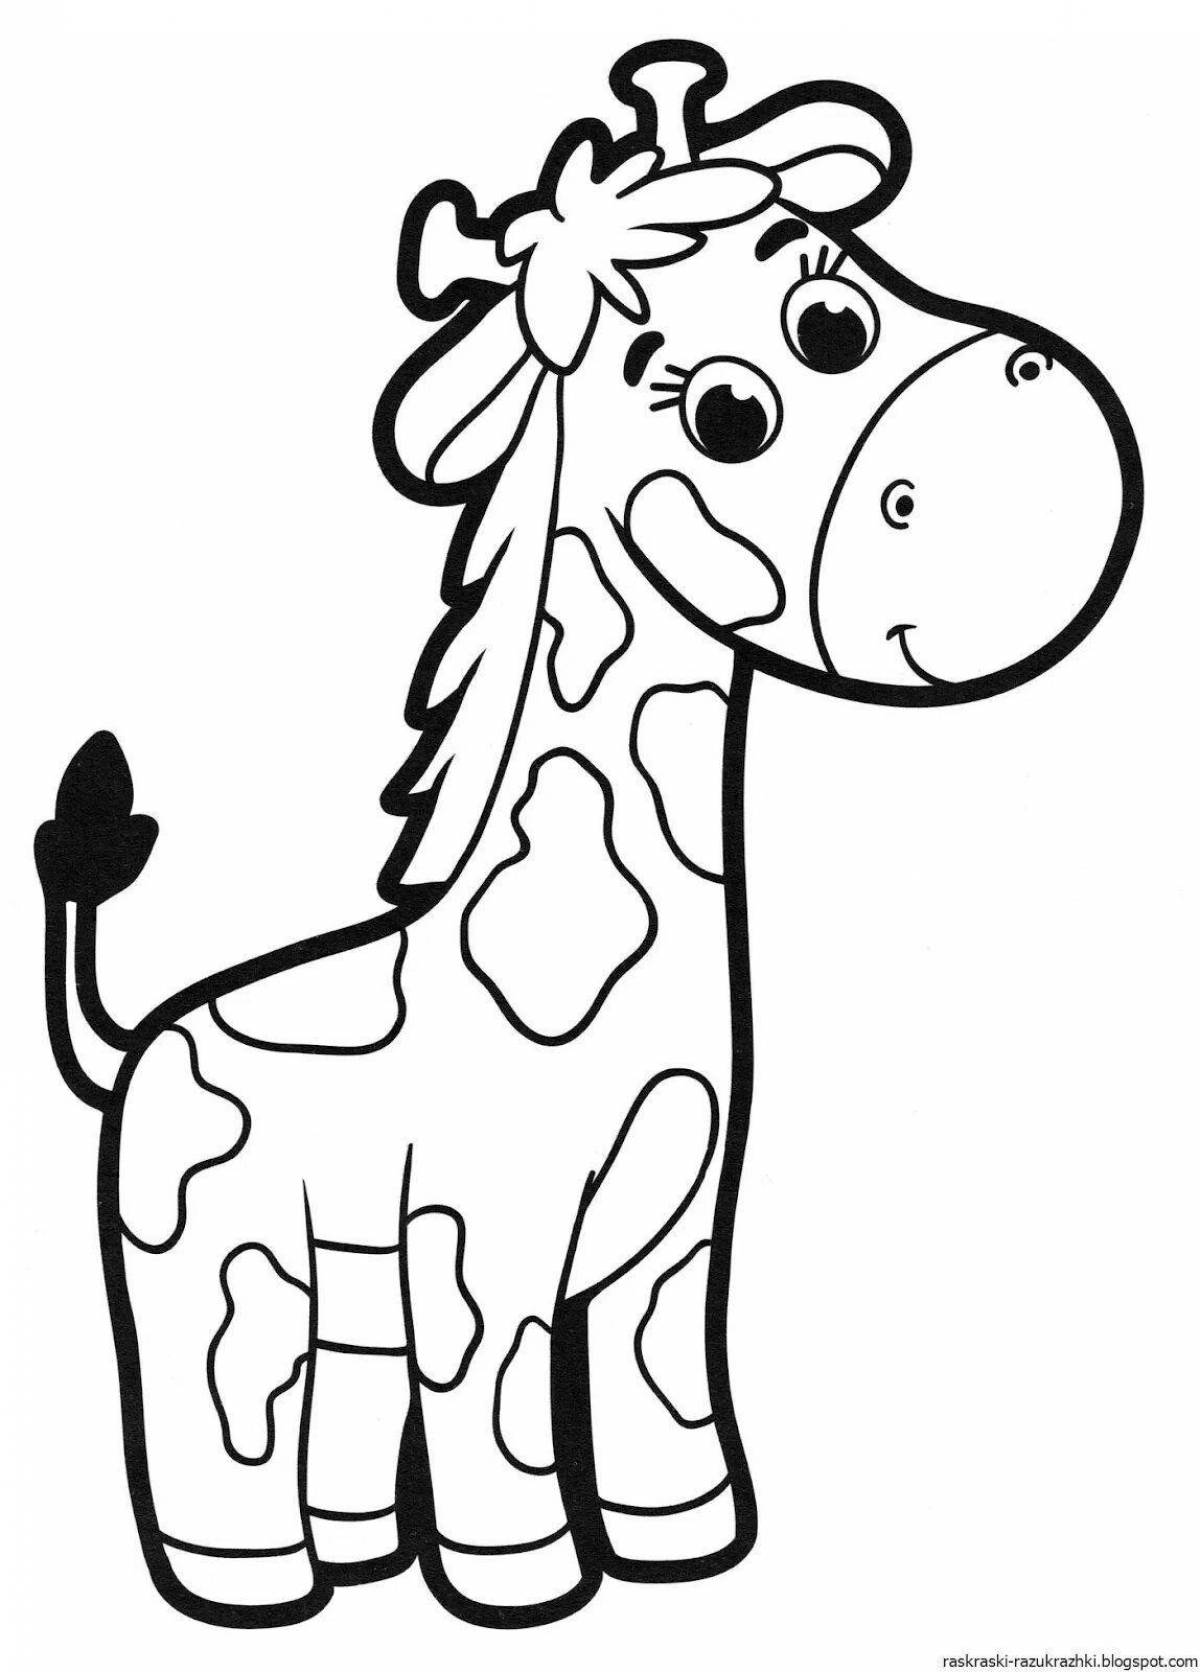 Cute giraffe coloring book for 6-7 year olds